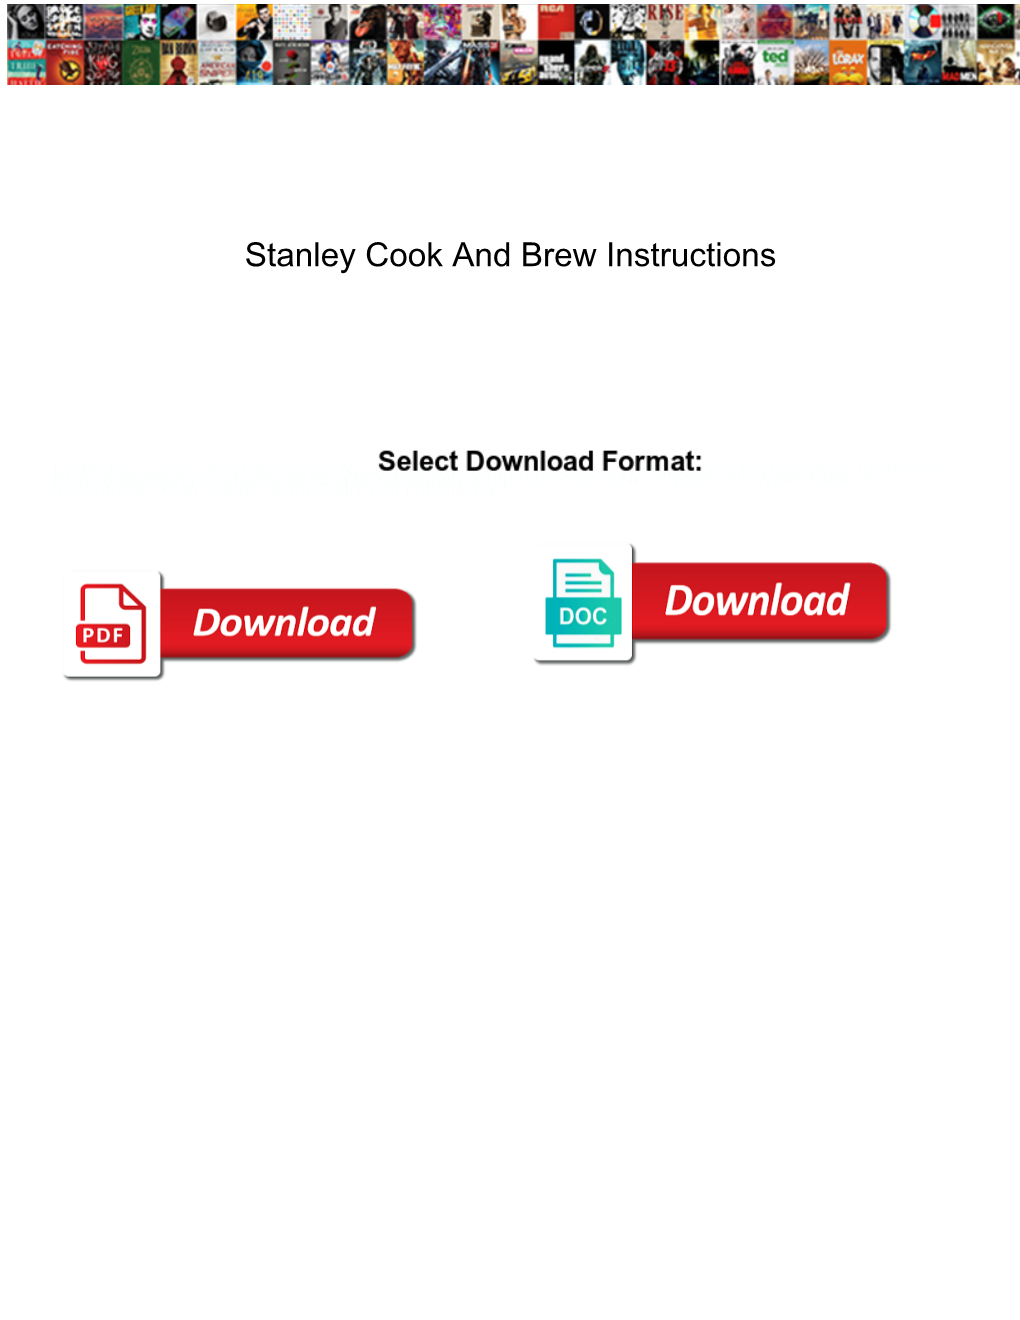 Stanley Cook and Brew Instructions